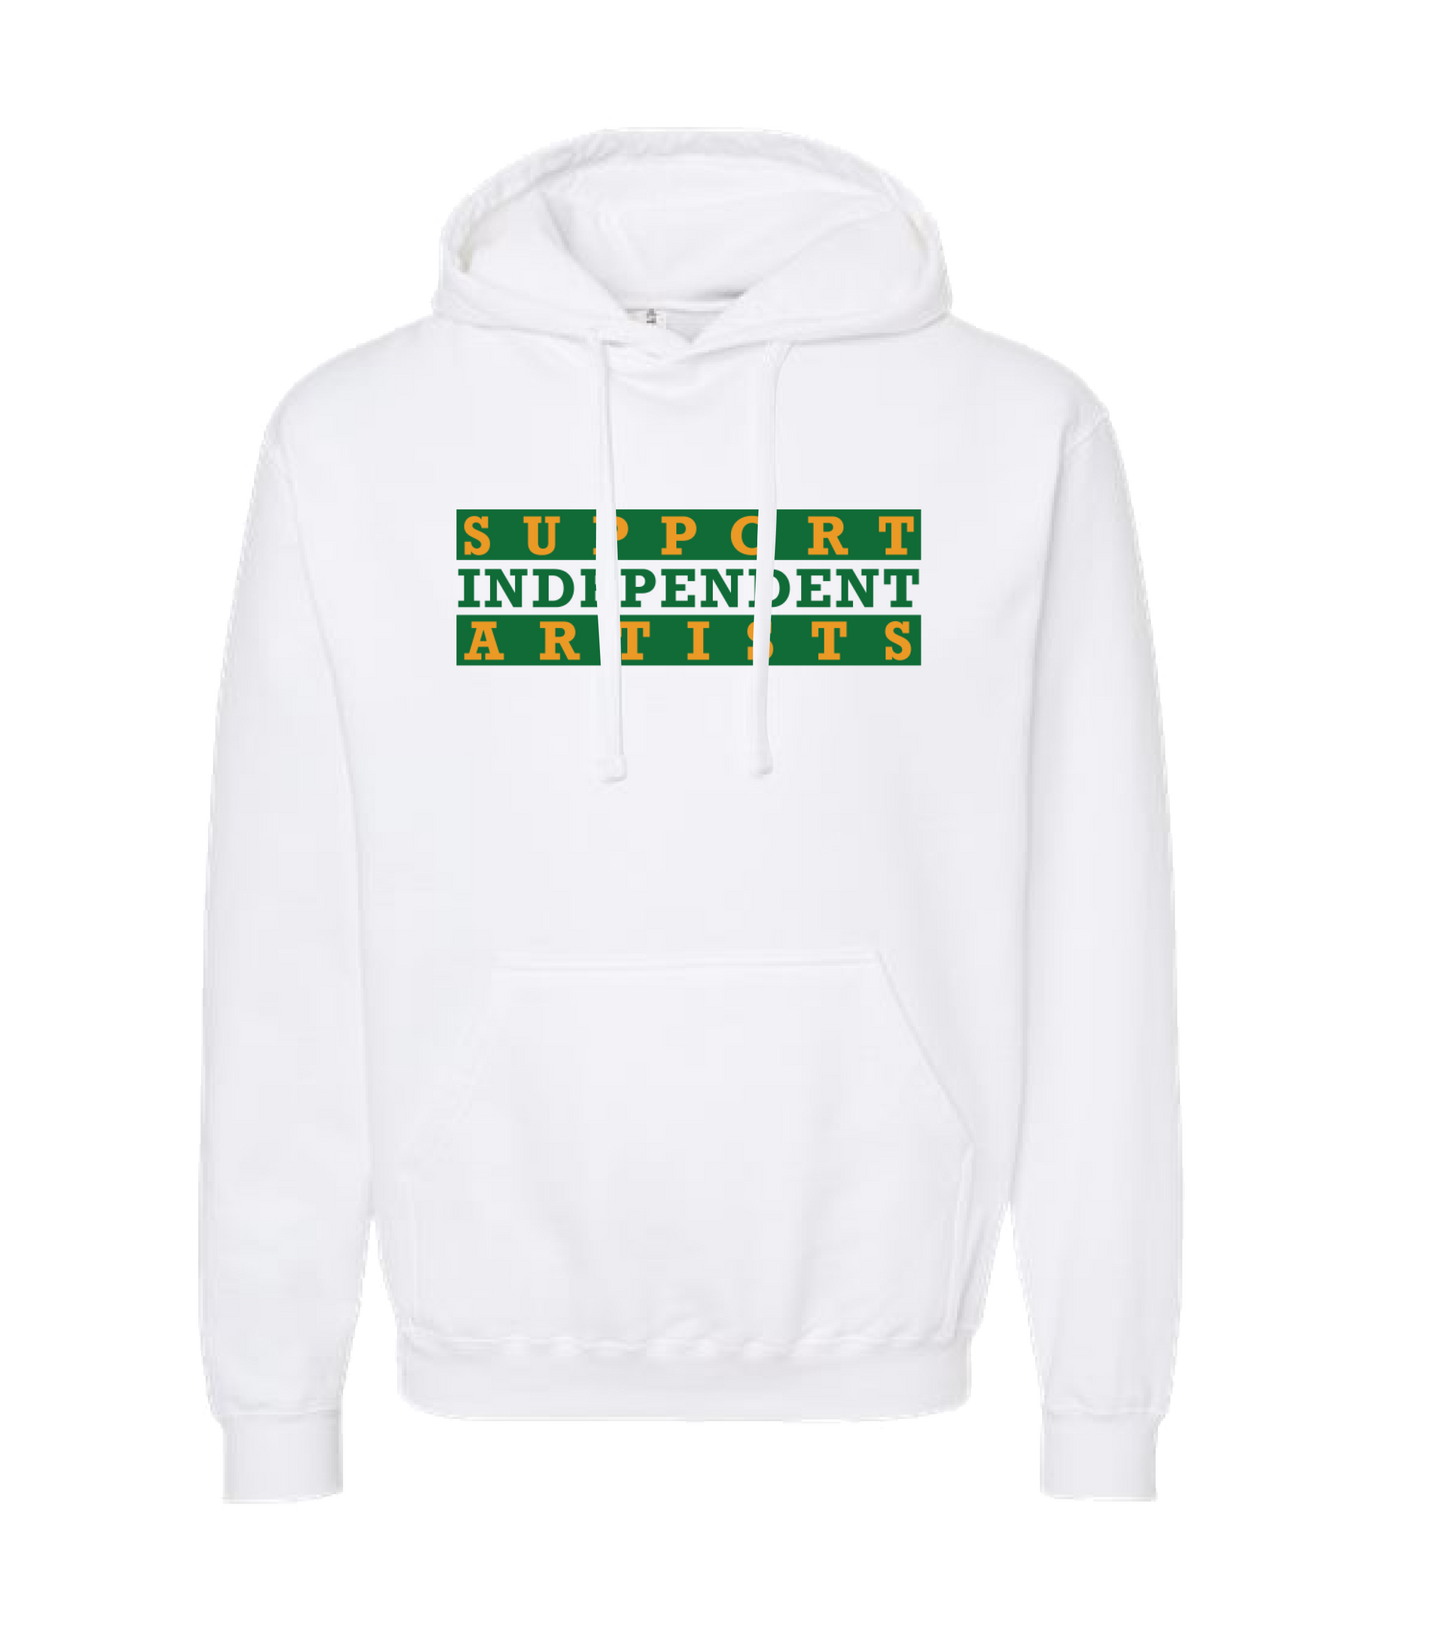 The Big Break - Support Independent Artists - White Hoodie